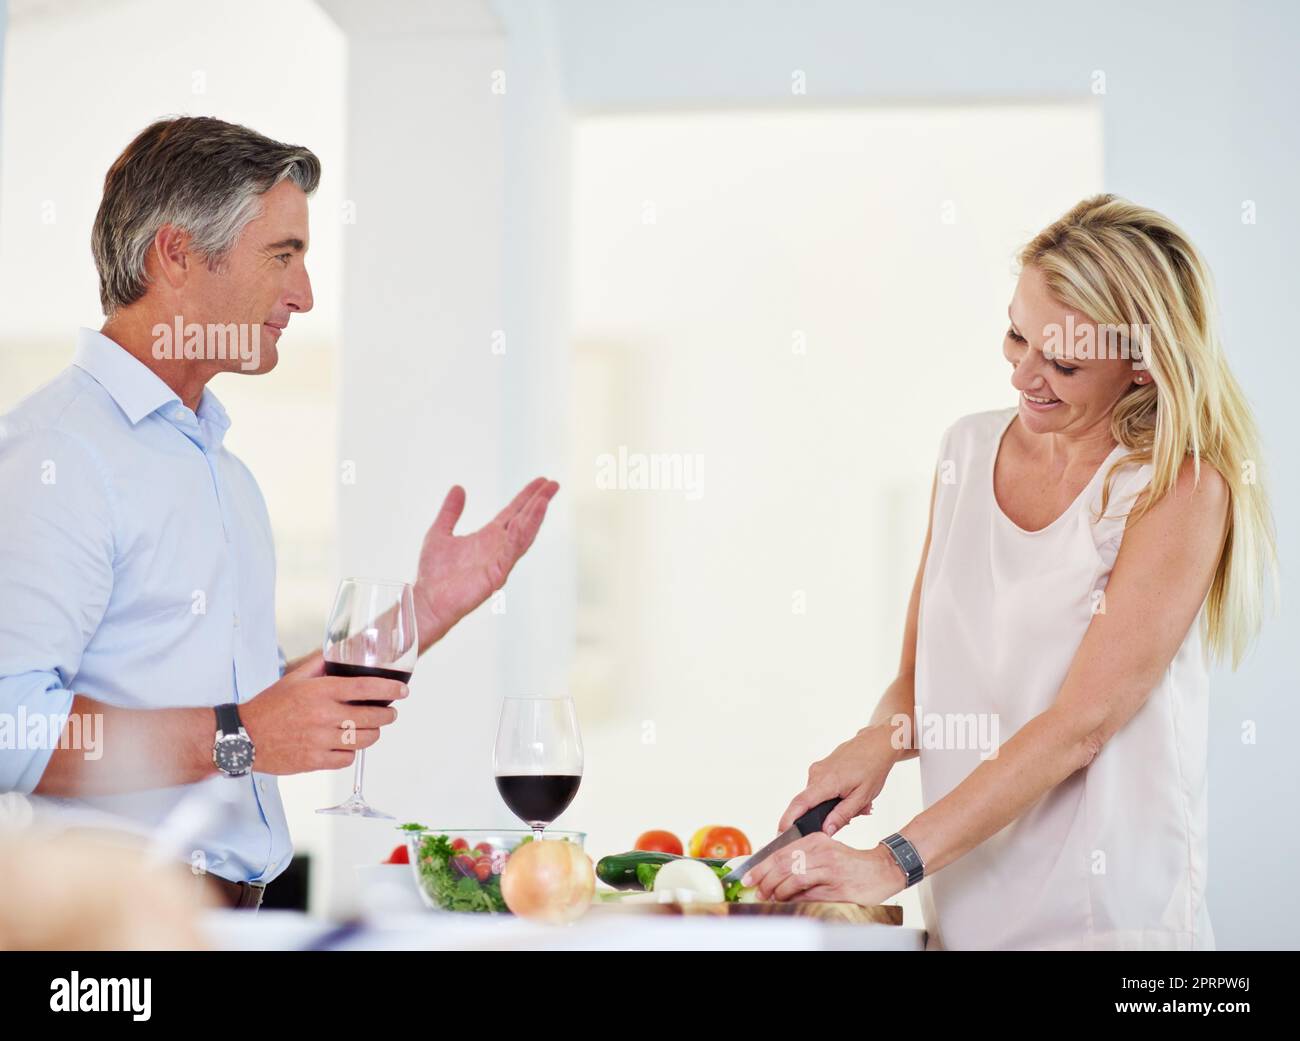 Dinnertime banter. a mature couple talking together while making dinner. Stock Photo